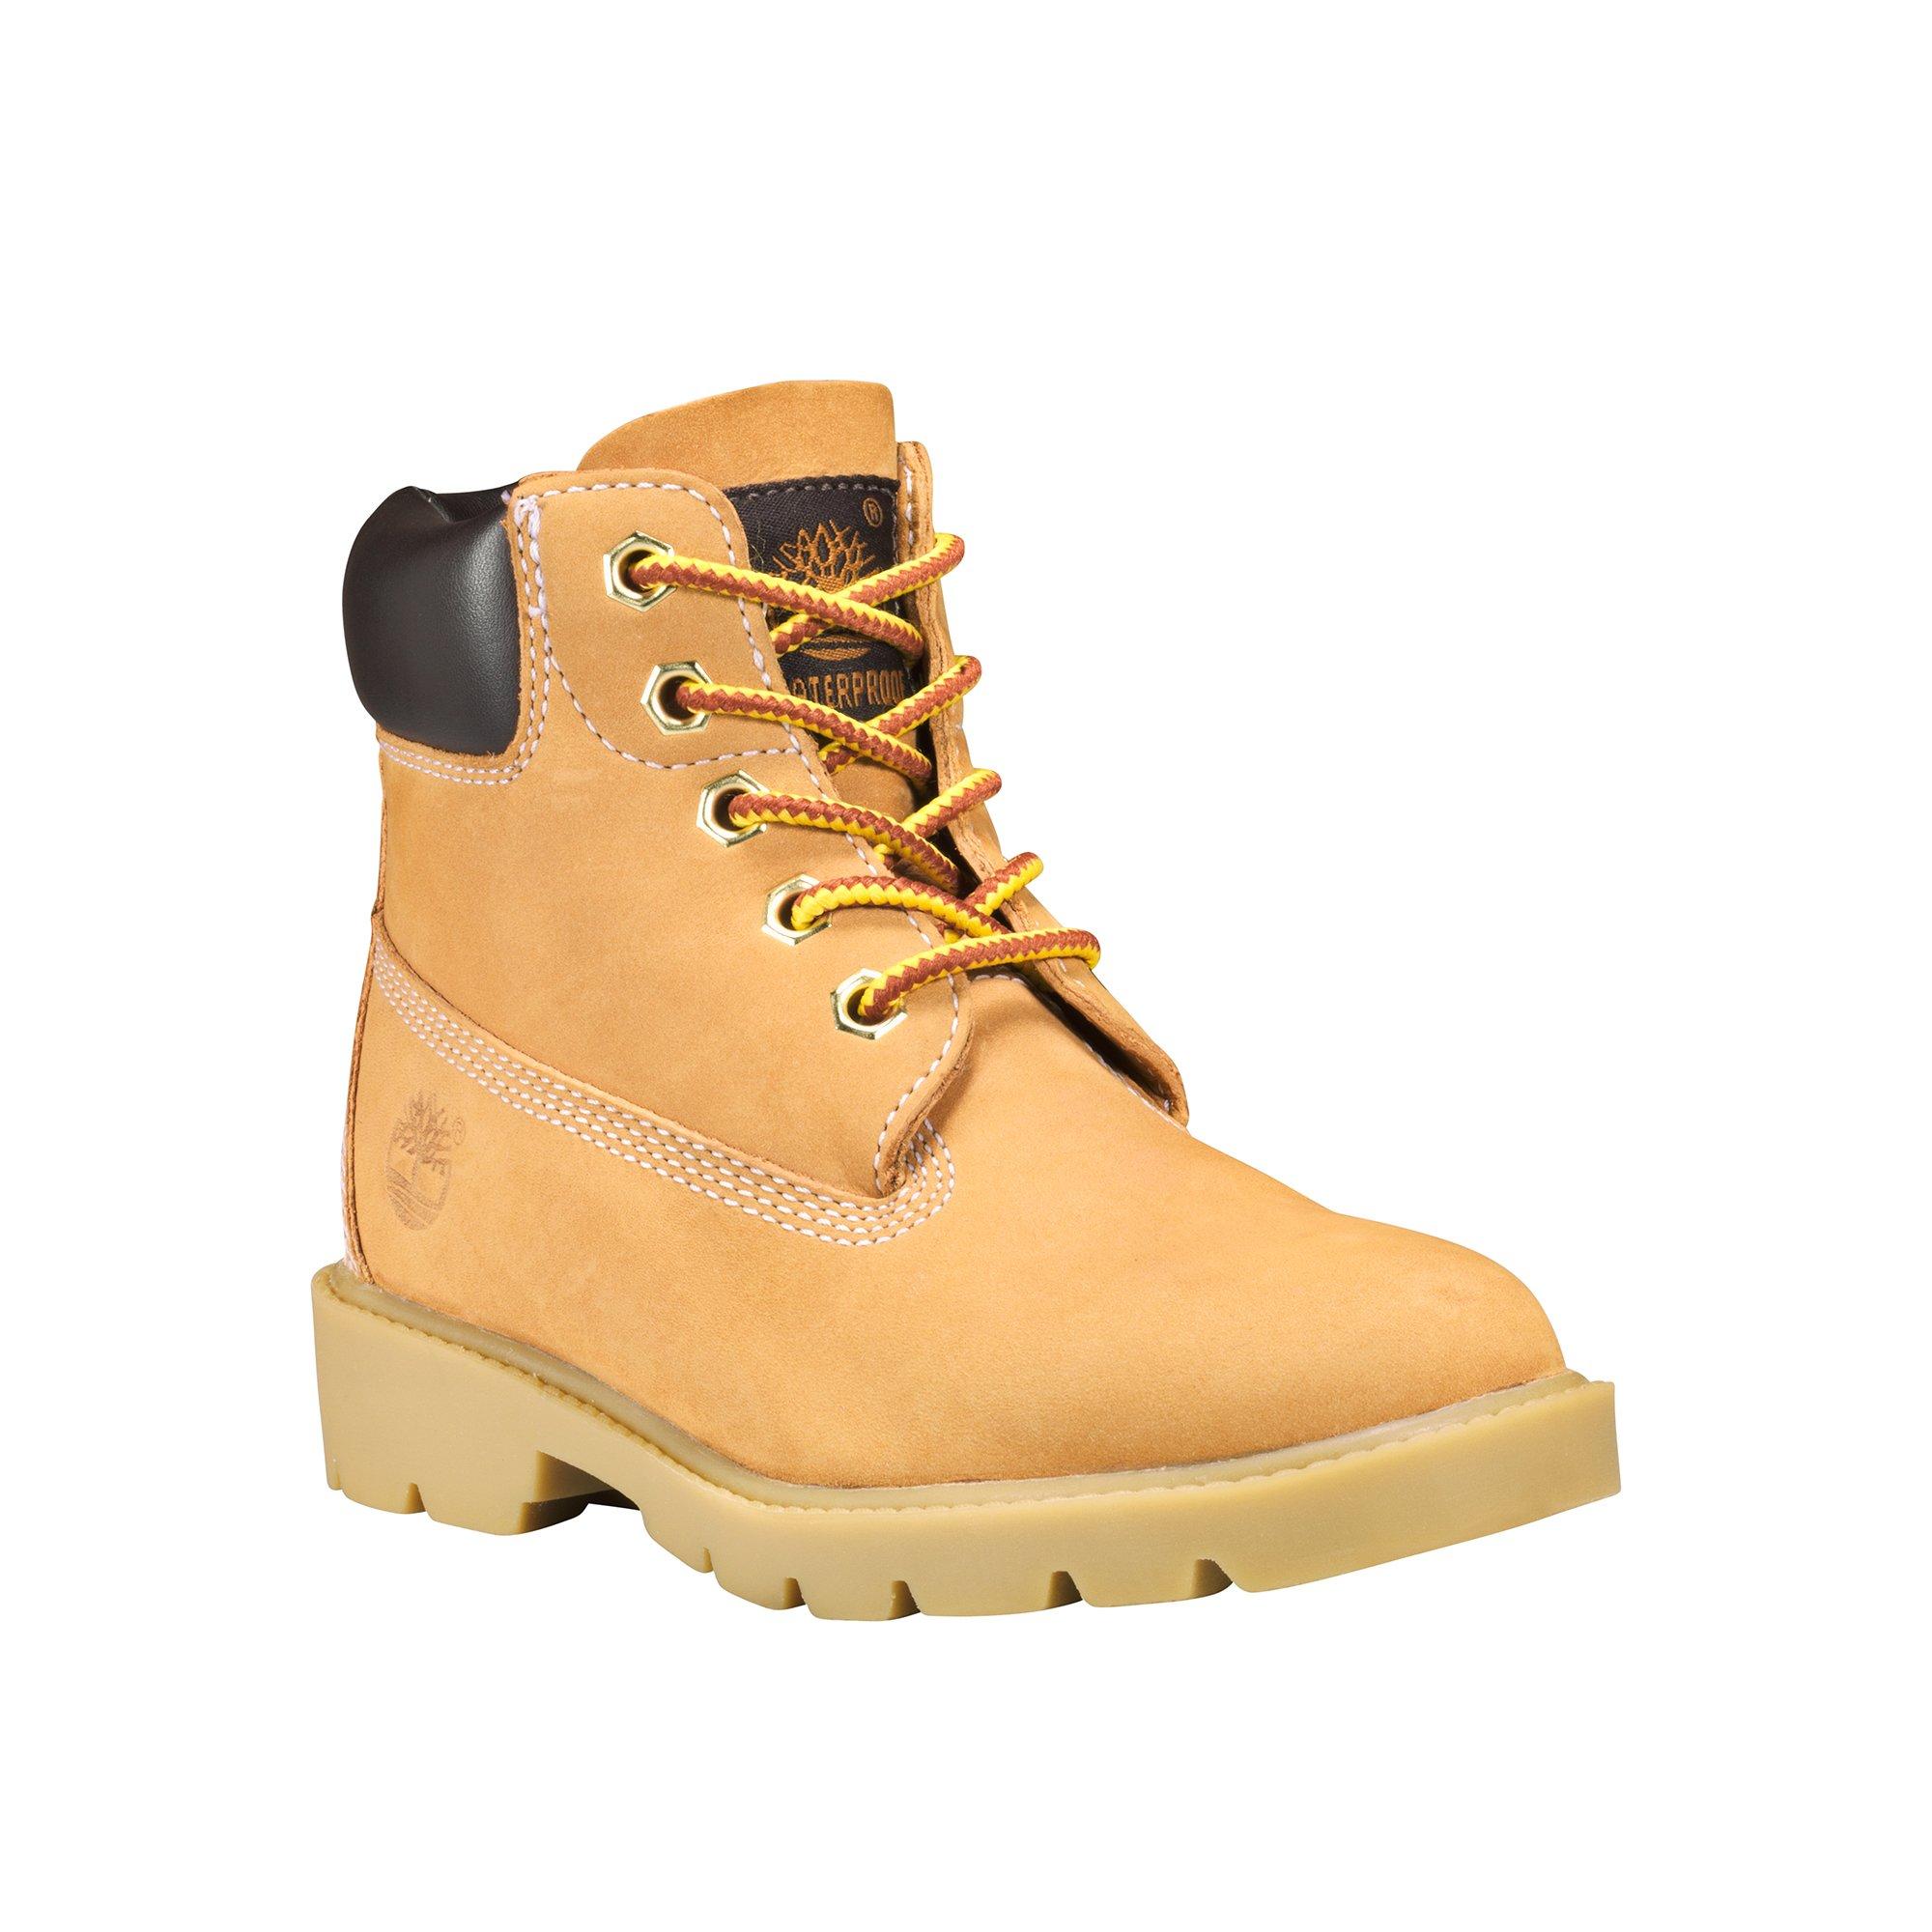 timbs boots price